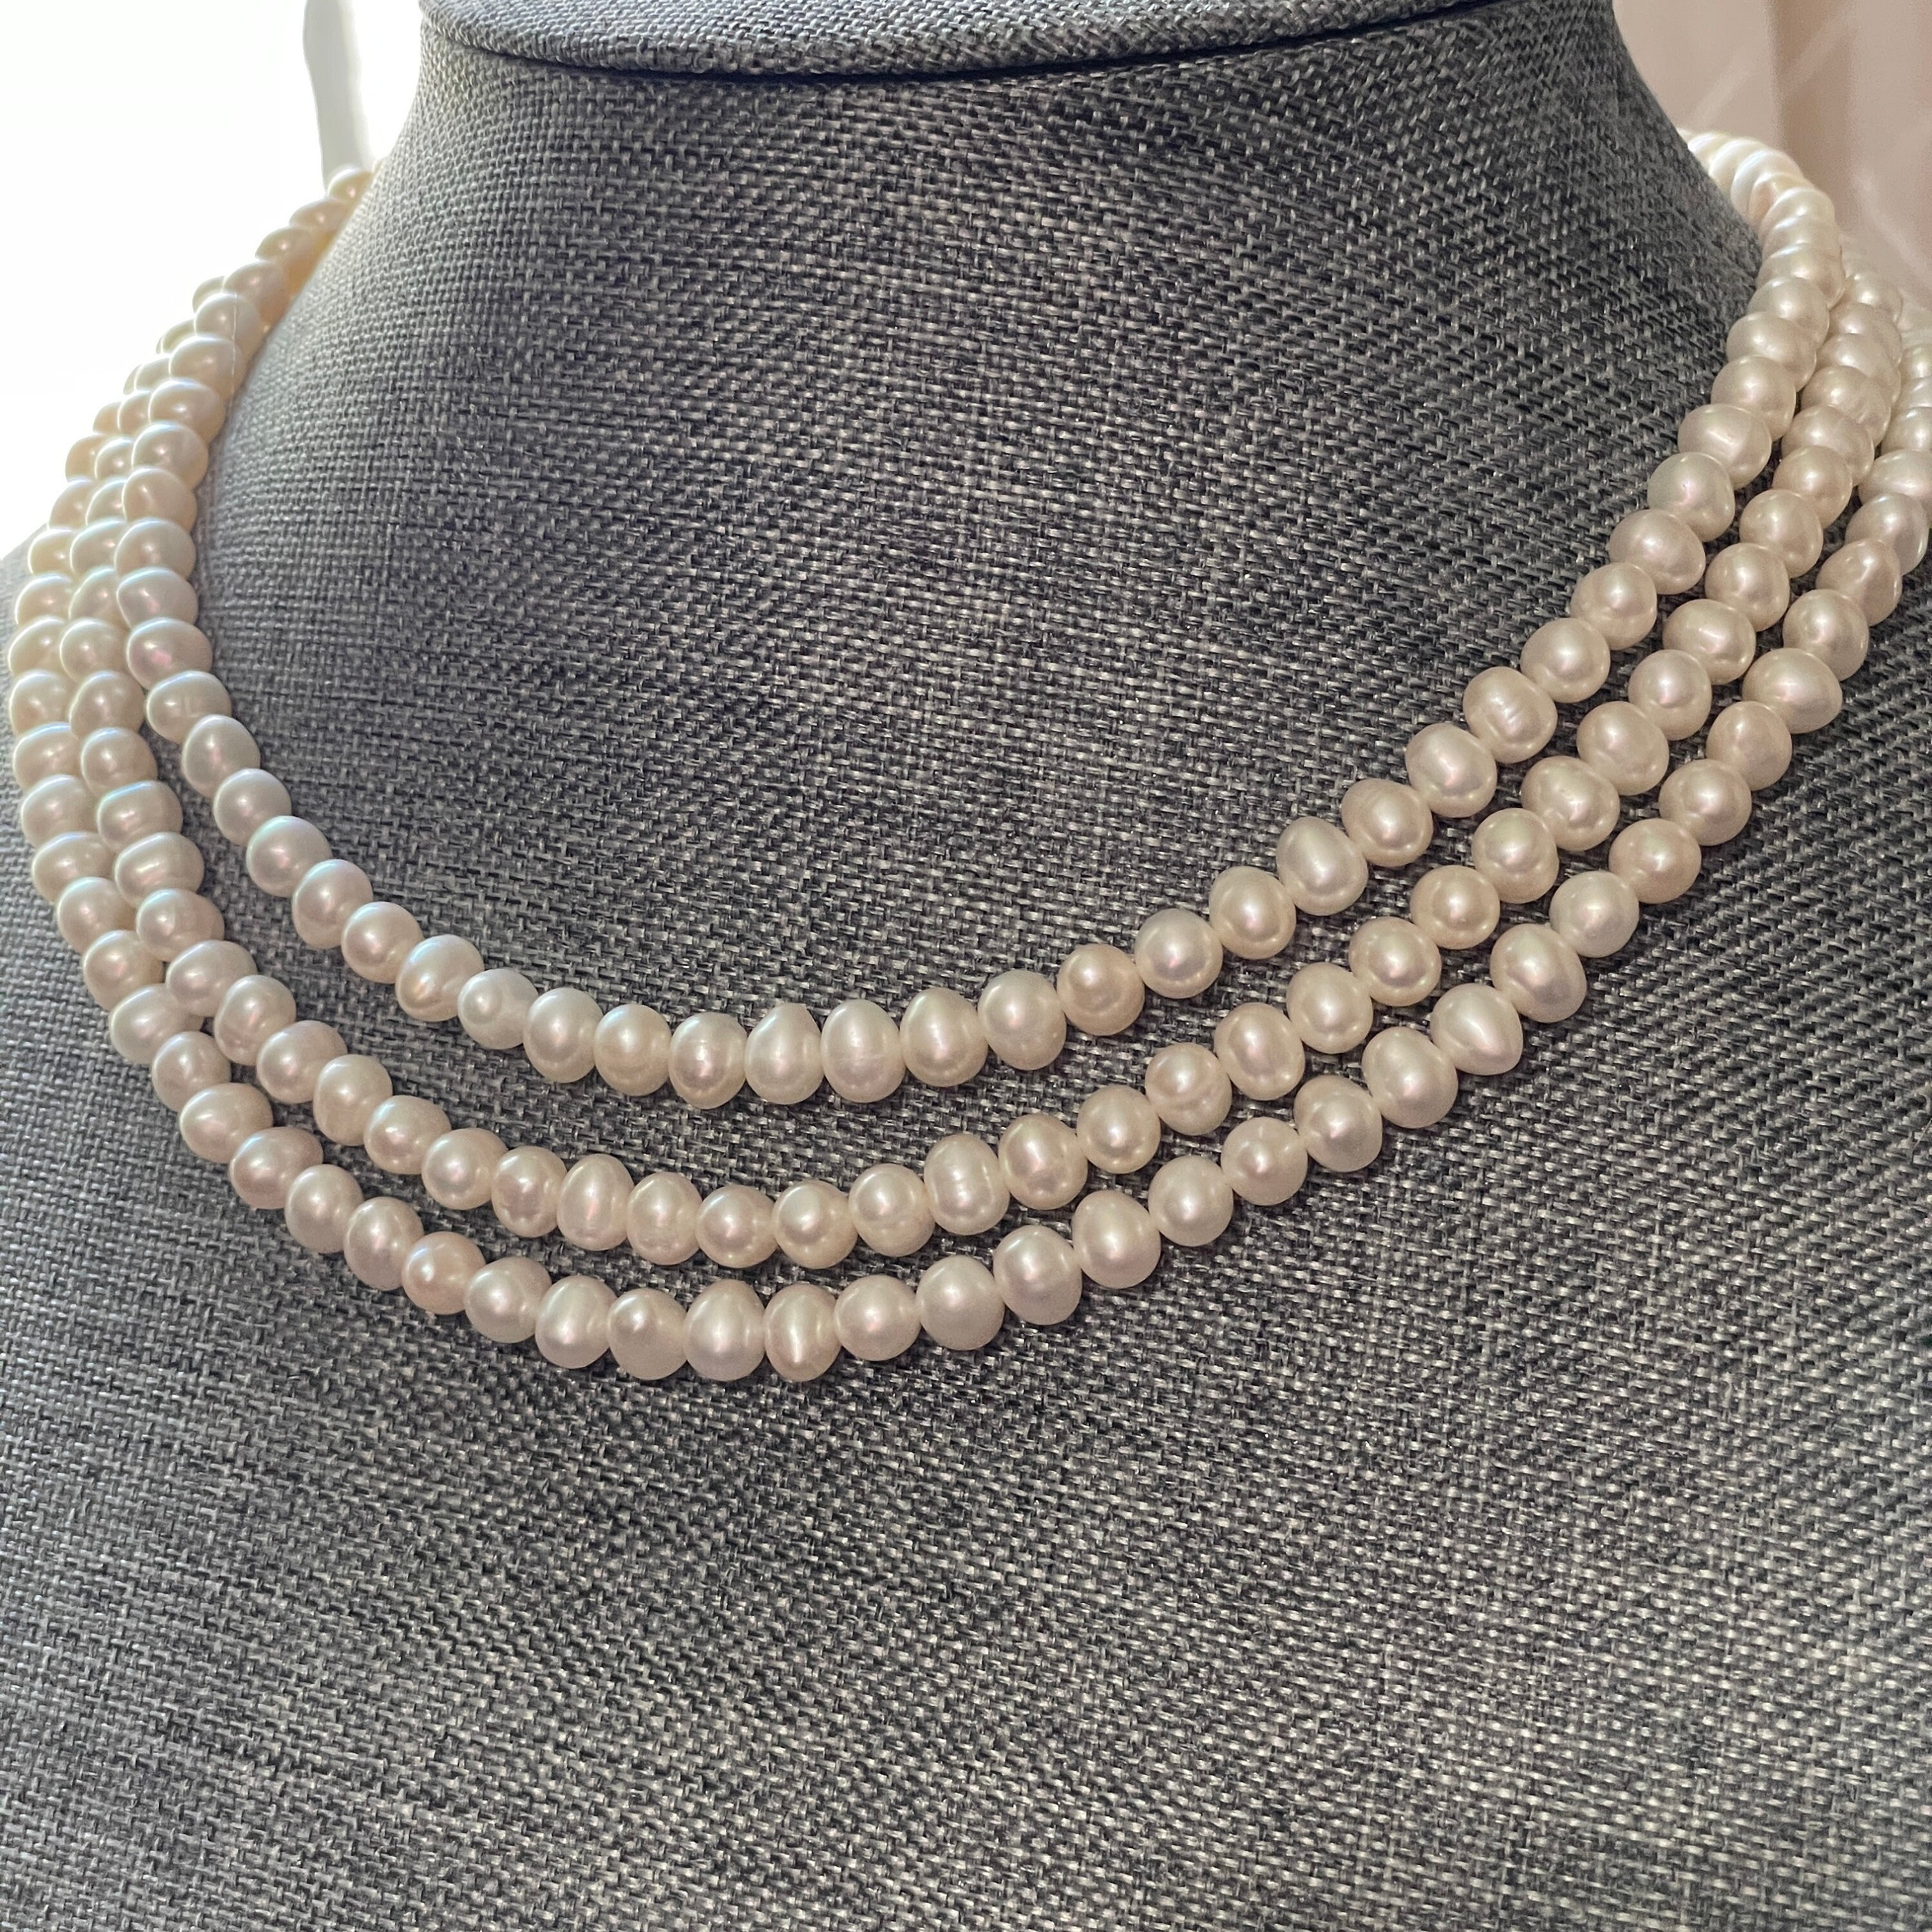 16 inch 3 Piece Set of 8.5-9.0 mm AA+ White Freshwater Pearls 14K Yellow Gold Ball Polished / 7 inch by Pearl Paradise